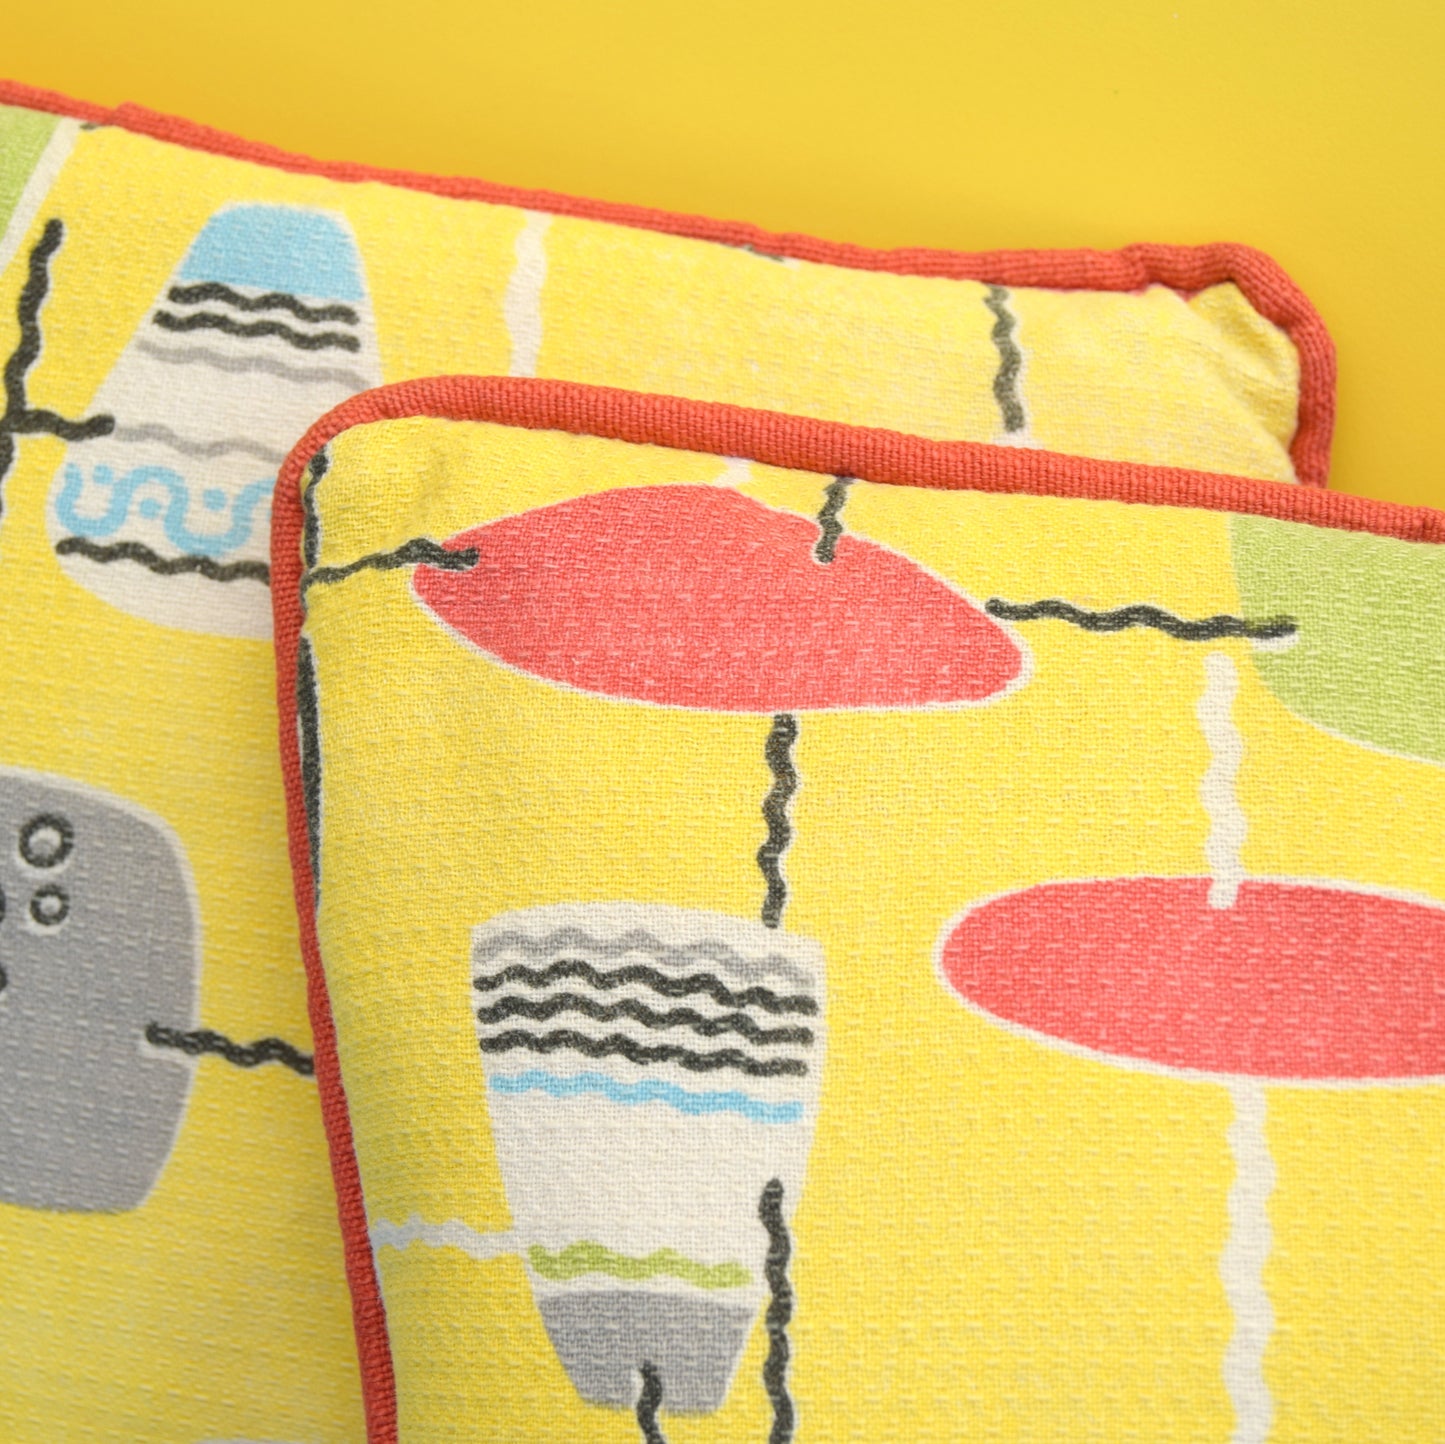 Vintage 1950s Cushions - Classic Print - Lamps Fabric - Yellow